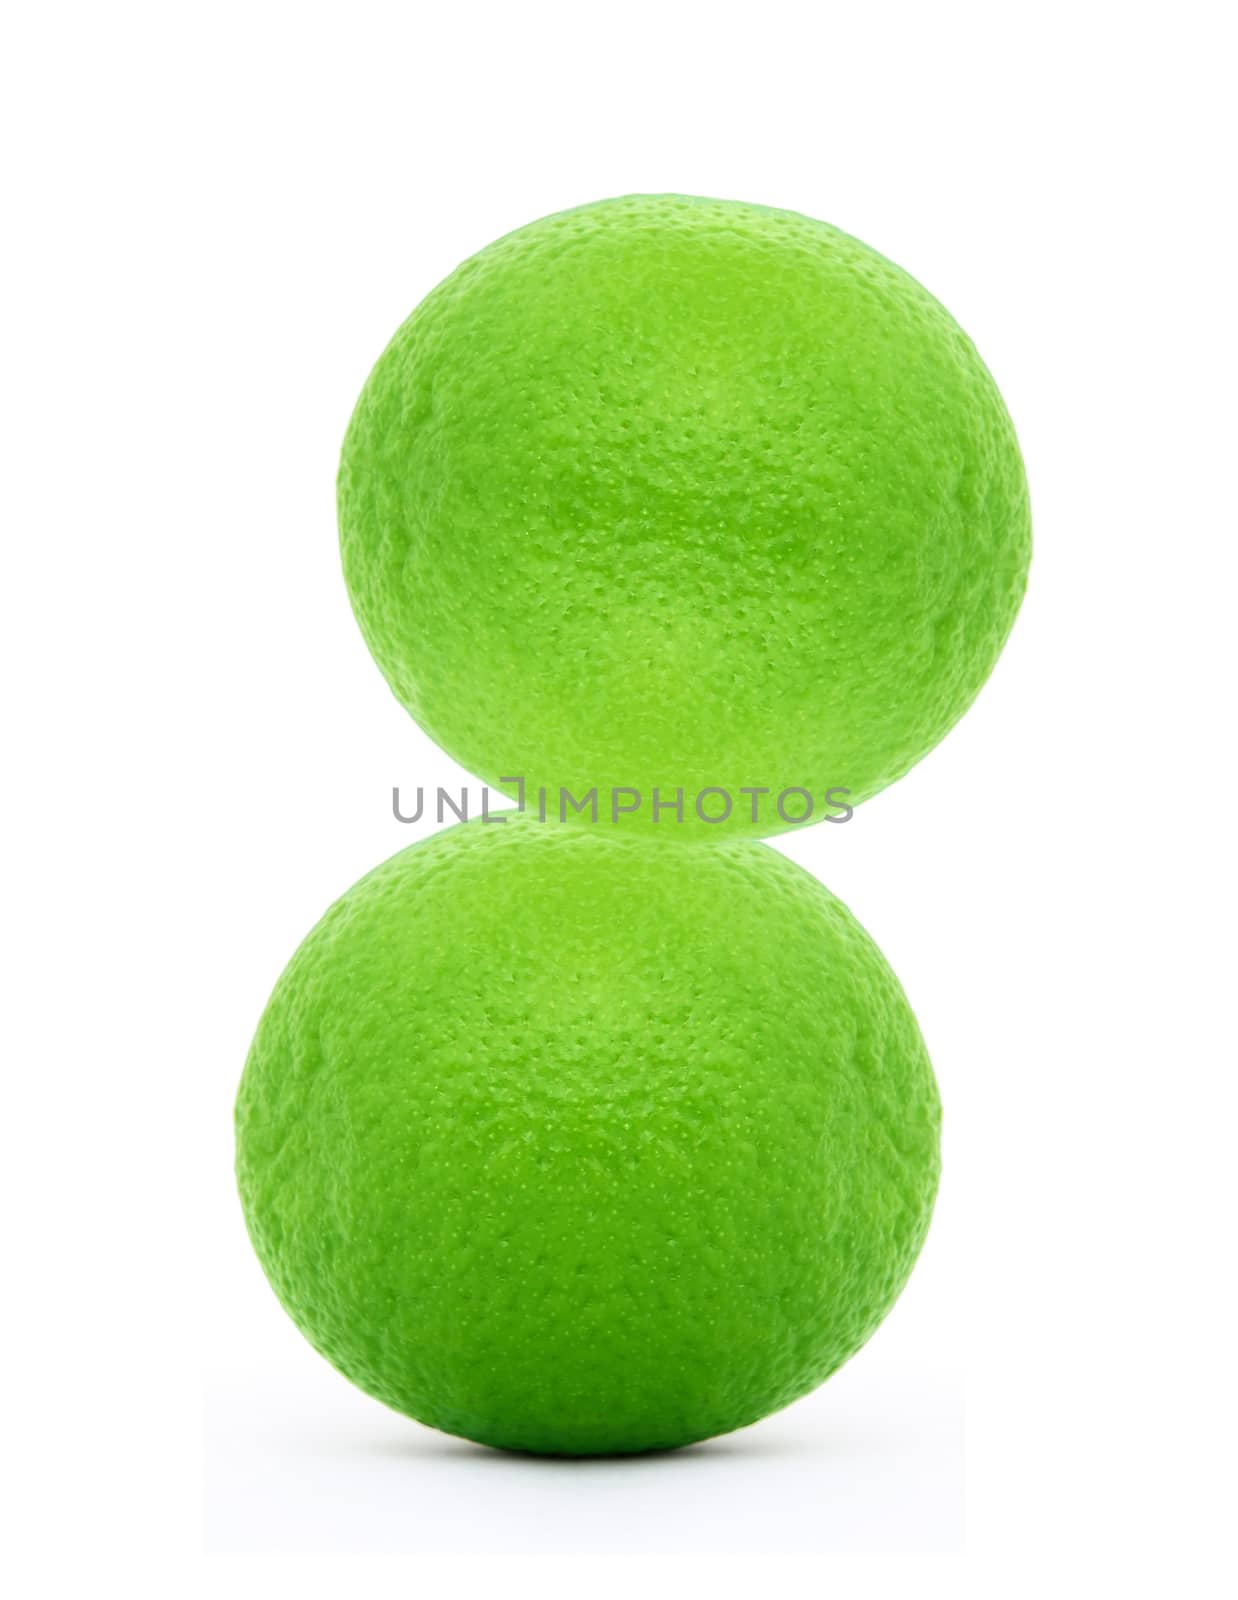 limes on white background by ozaiachin